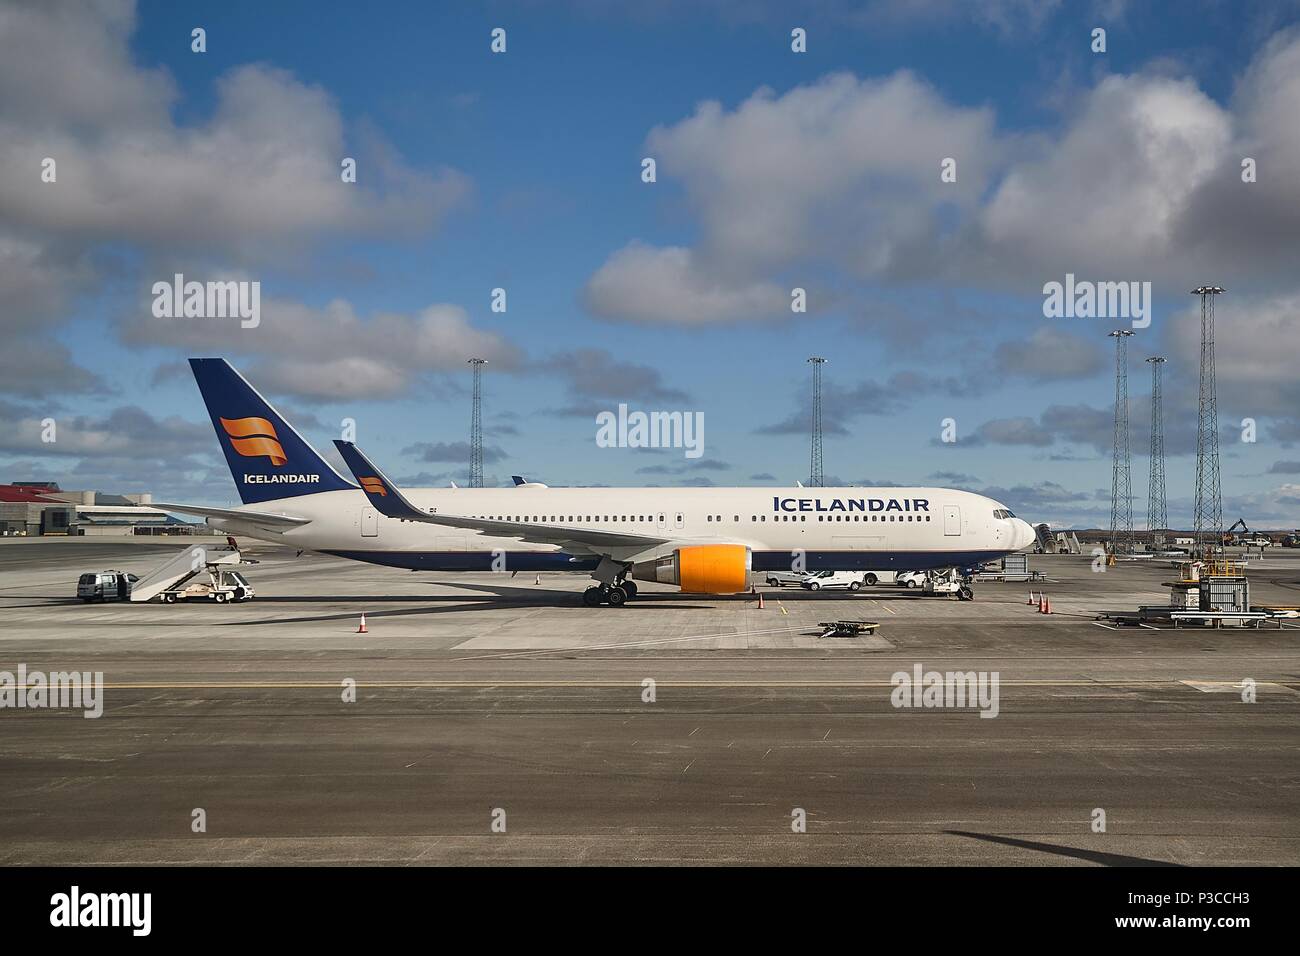 Airliner of Icelandair Stock Photo